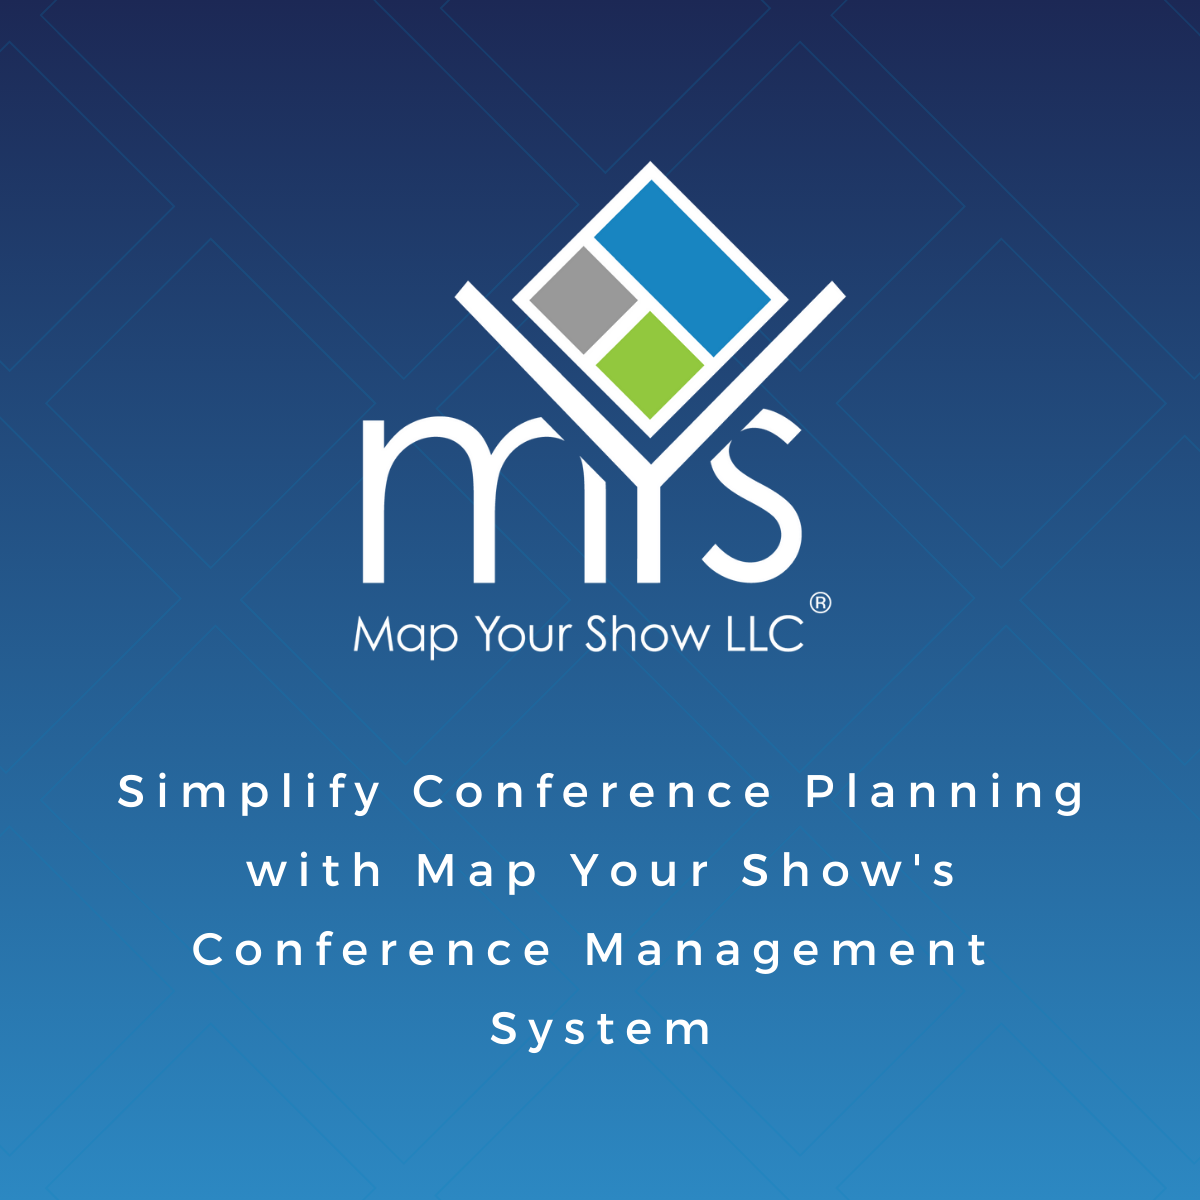 Simplify Conference Planning with Map Your Show's Conference Management System